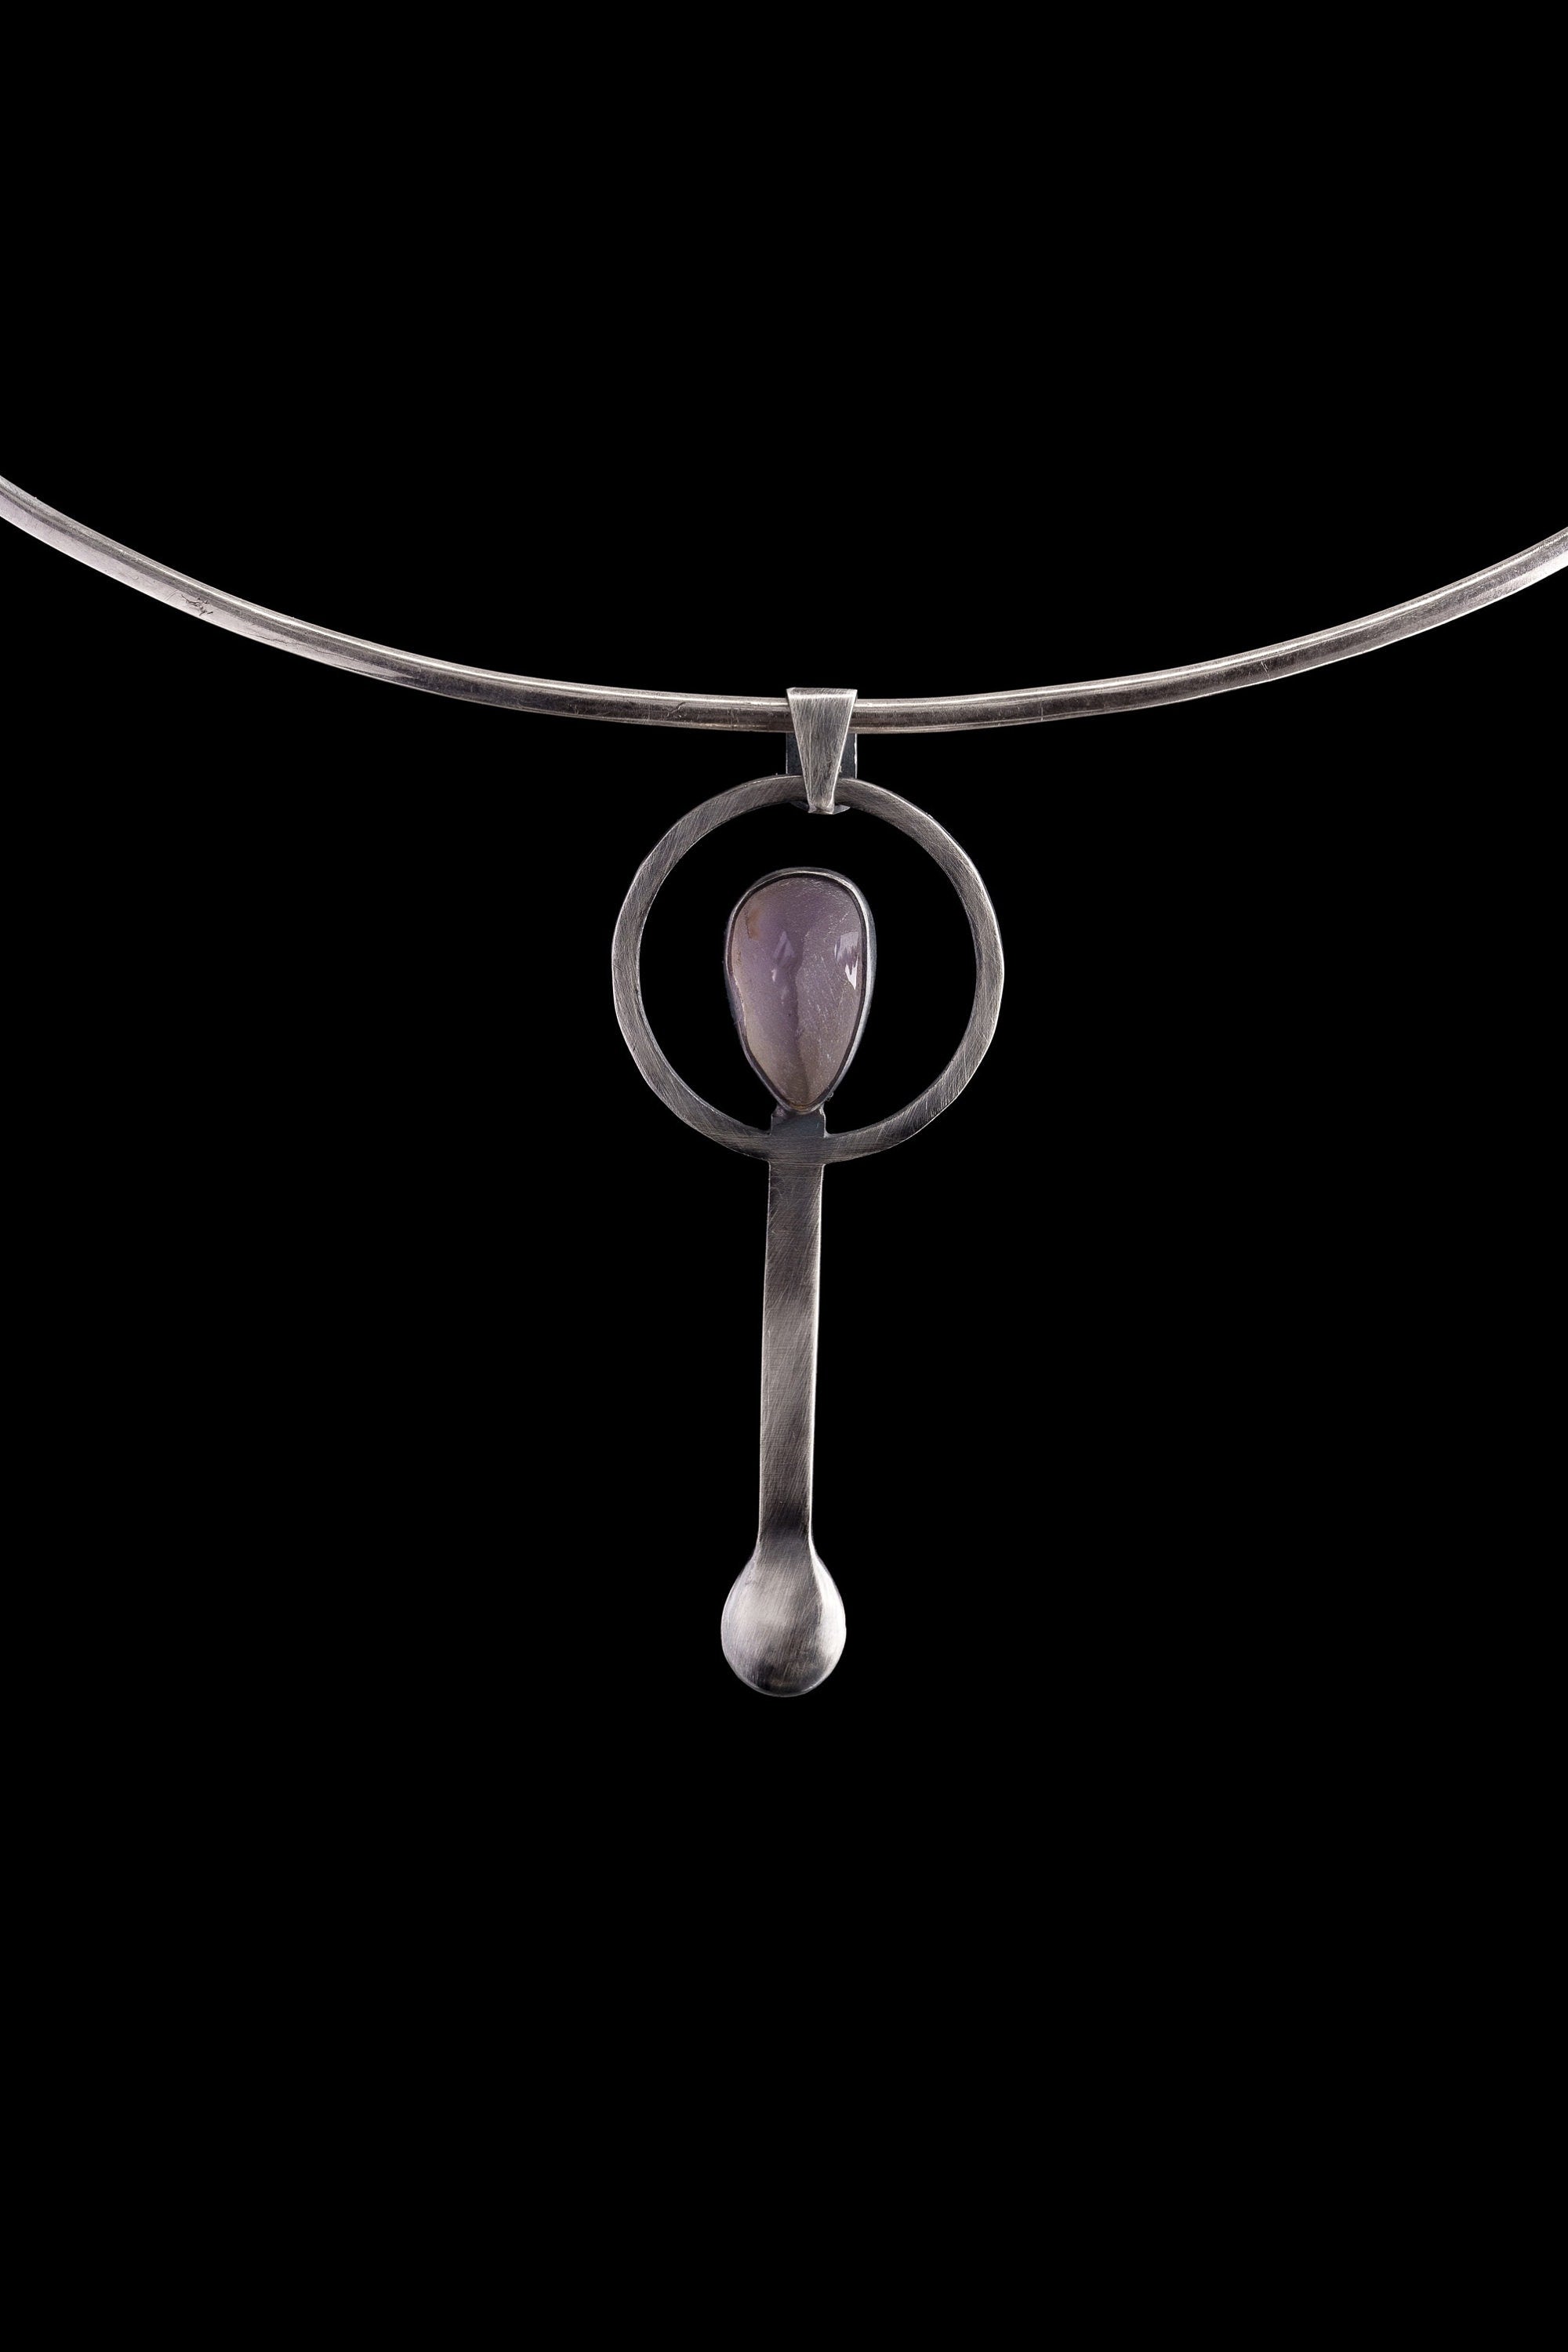 Raw Amethyst Cabochon - Spice / Ceremonial Spoon - 925 Cast Silver - Oxidised Brush and Hammered Textured - Crystal Pendant Necklace